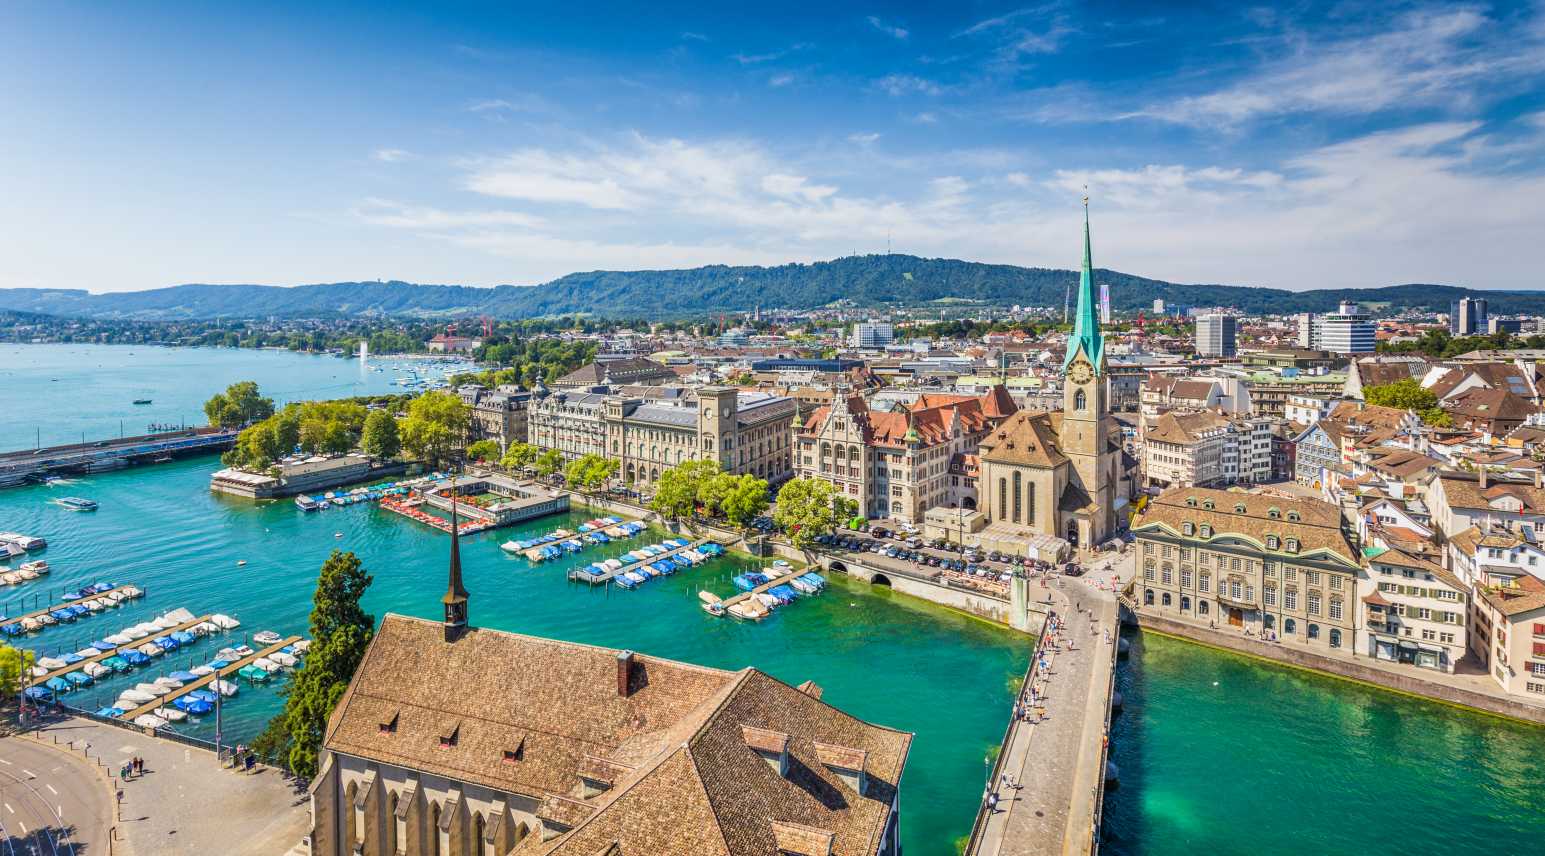 Image of Zurich City showing canals and a church